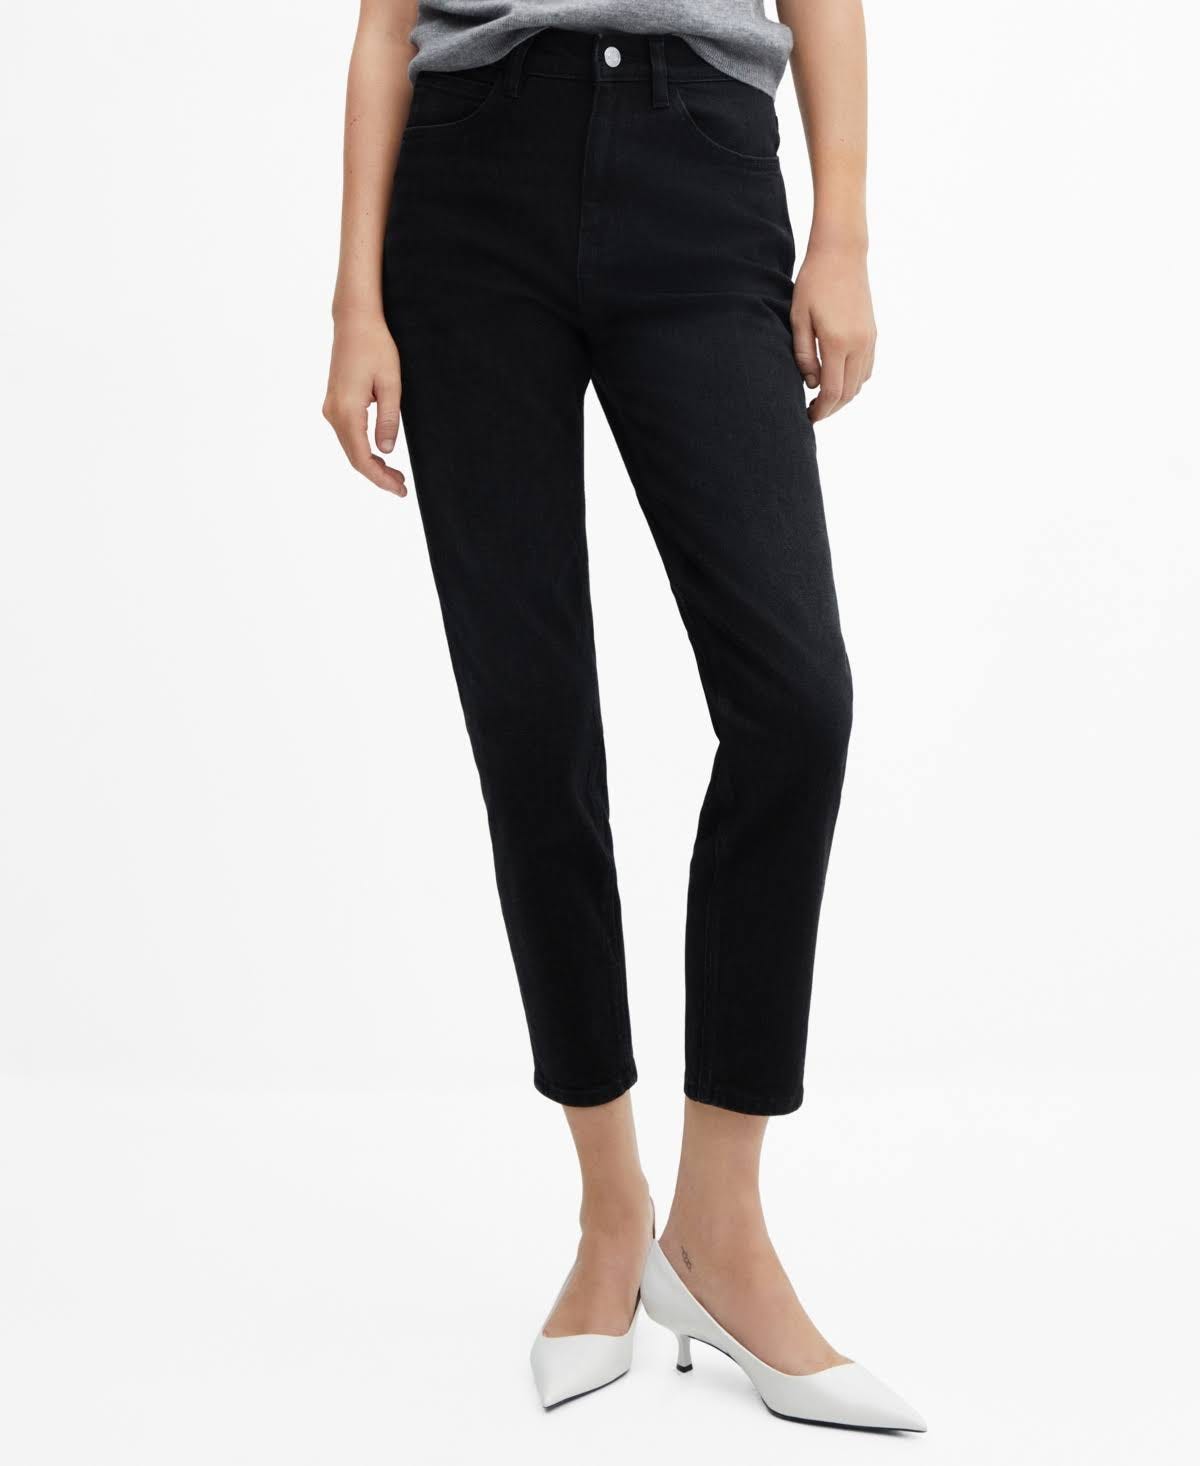 Mango Women's High-Rise Black Denim Jeans - Perfect for Every Style | Image